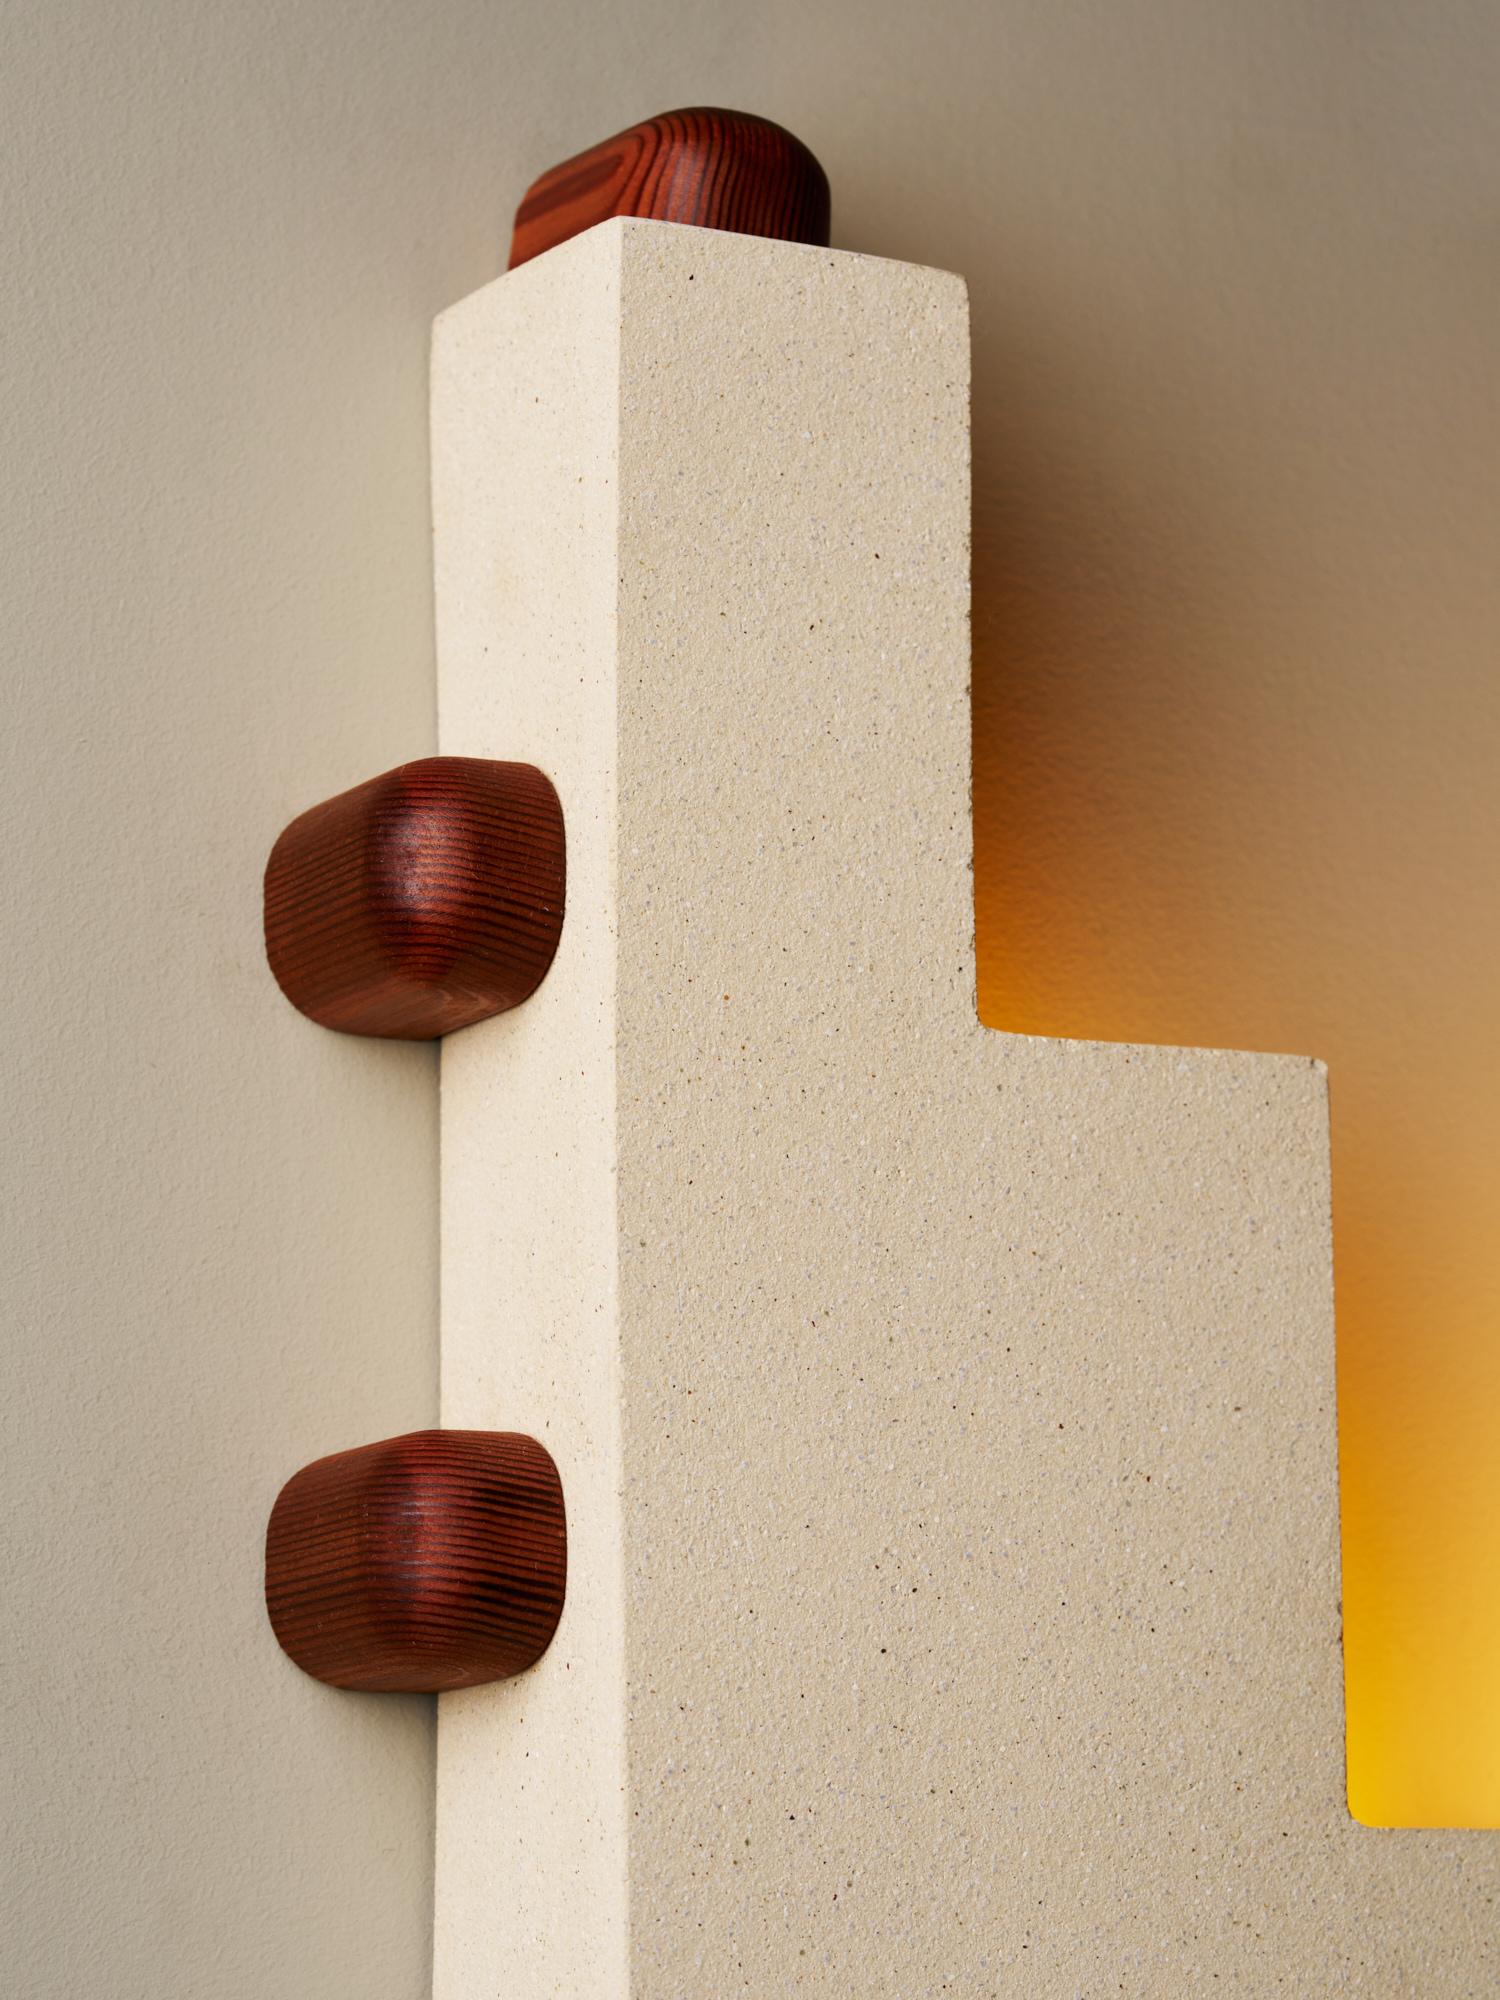 Contemporary Sierra Sconces in Ceramic, Wood and Brass by Piscina - H2 For Sale